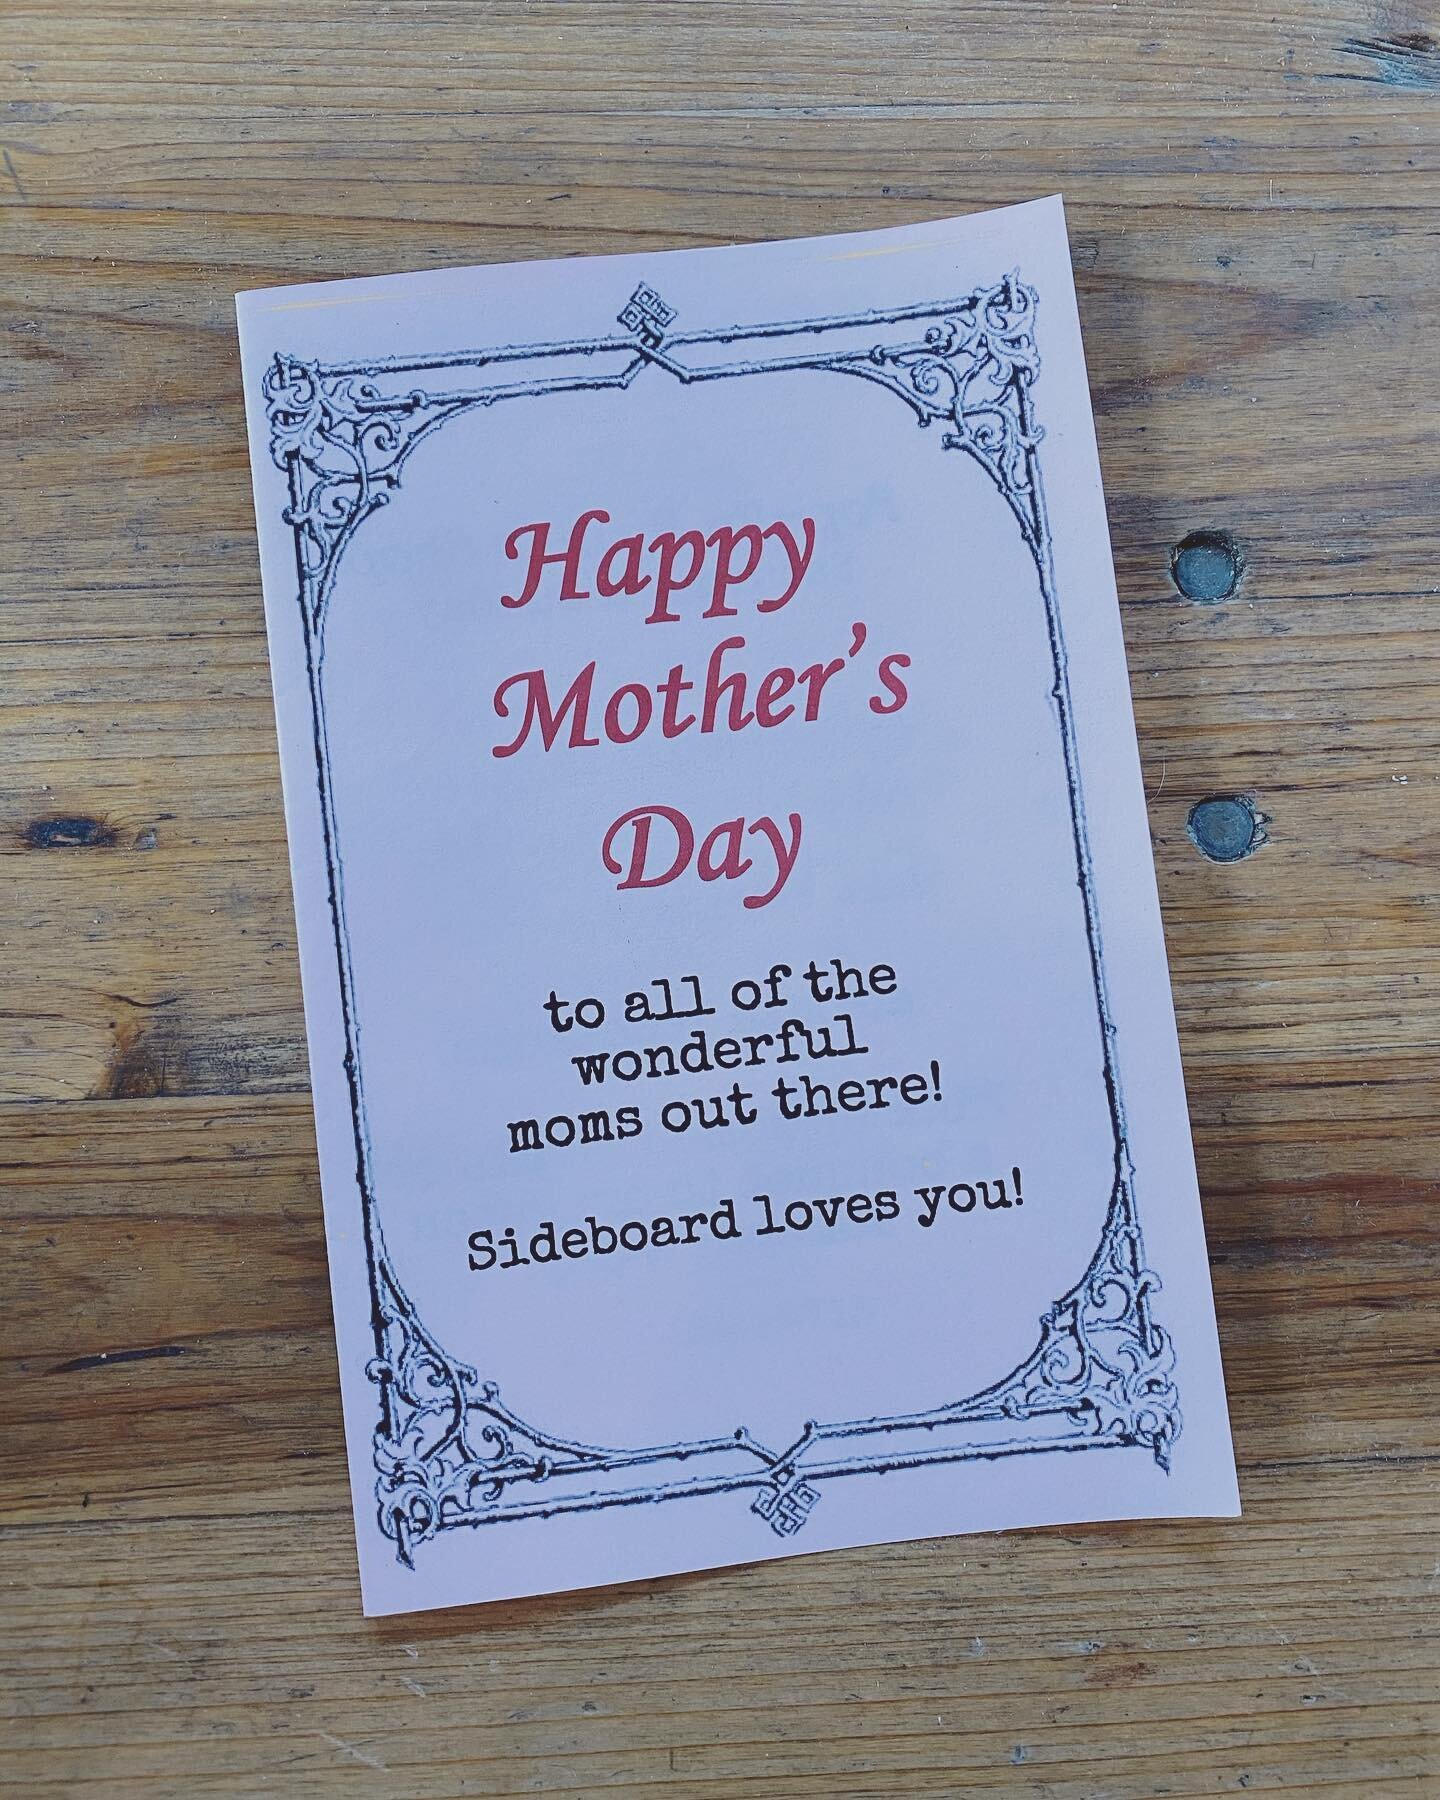 WE ARE OPENING EXTRA EARLY FOR MOTHERS DAY! Swipe to see our special items too! #sideboarddanville #sideboardlafayette #danville #lafayette #happymothersday